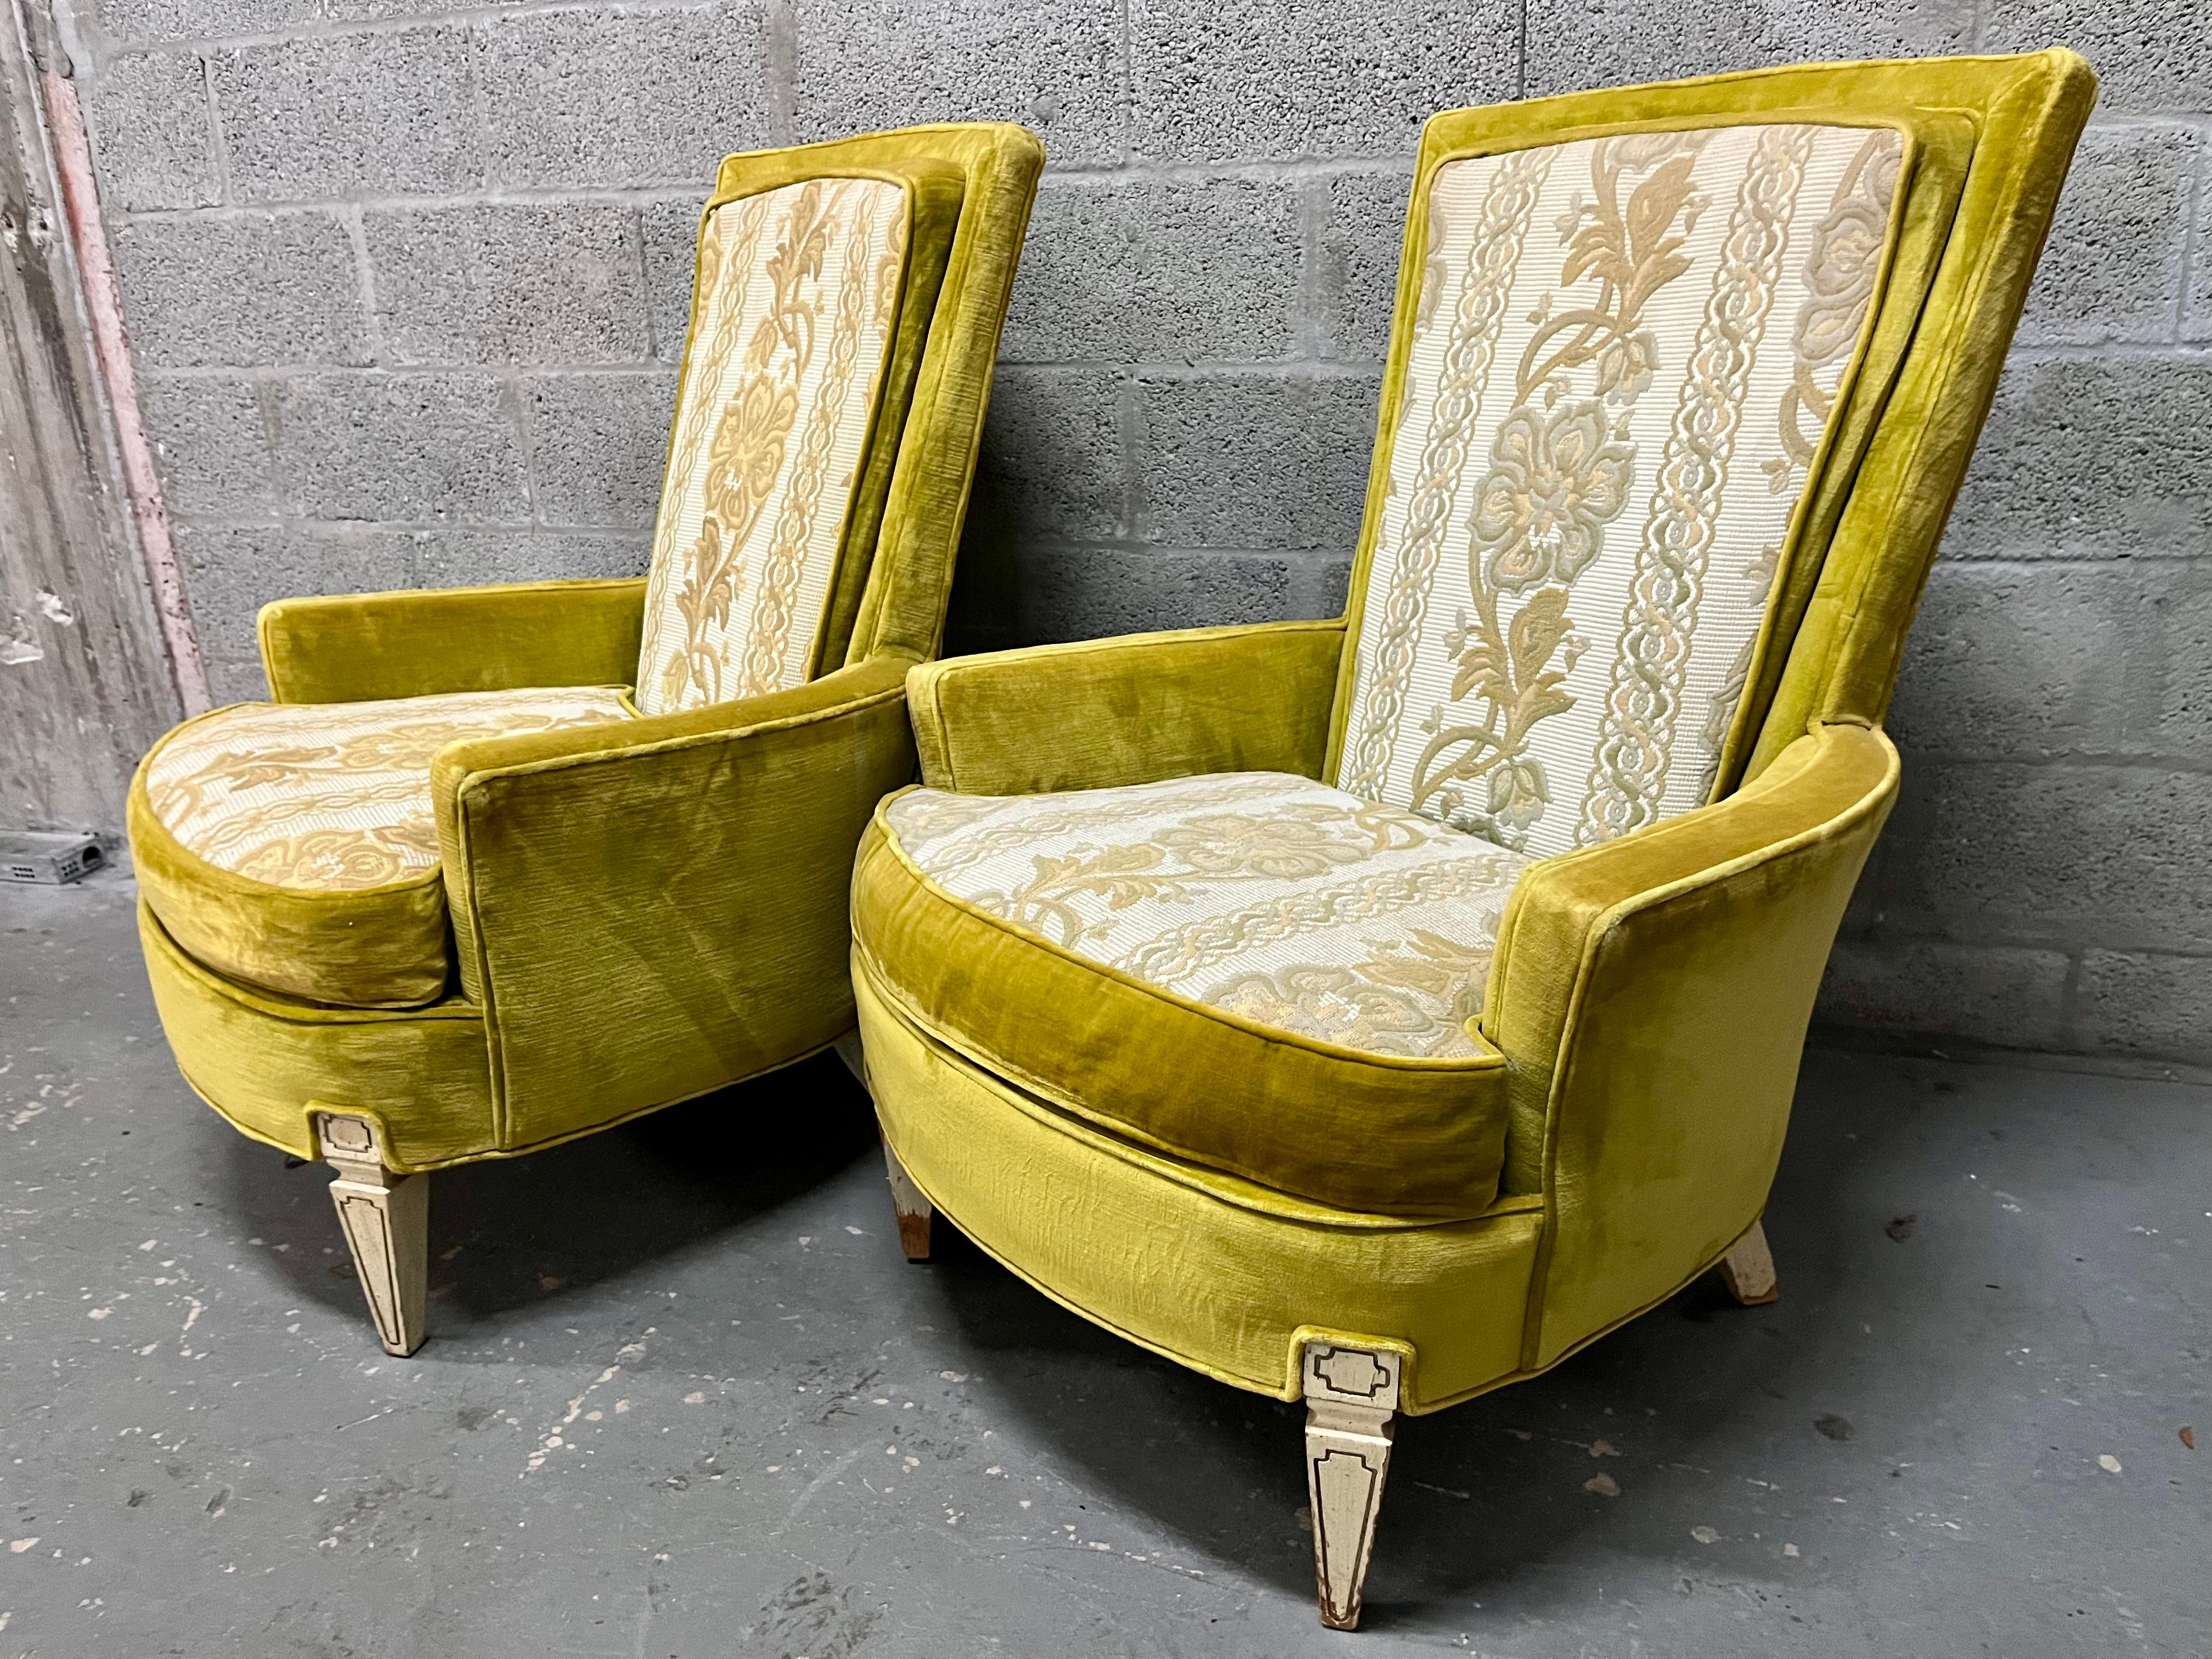 Velvet A Pair of Hollywood Regency Upholstered Lounge Chairs by Silver Craft. C. 1960s For Sale